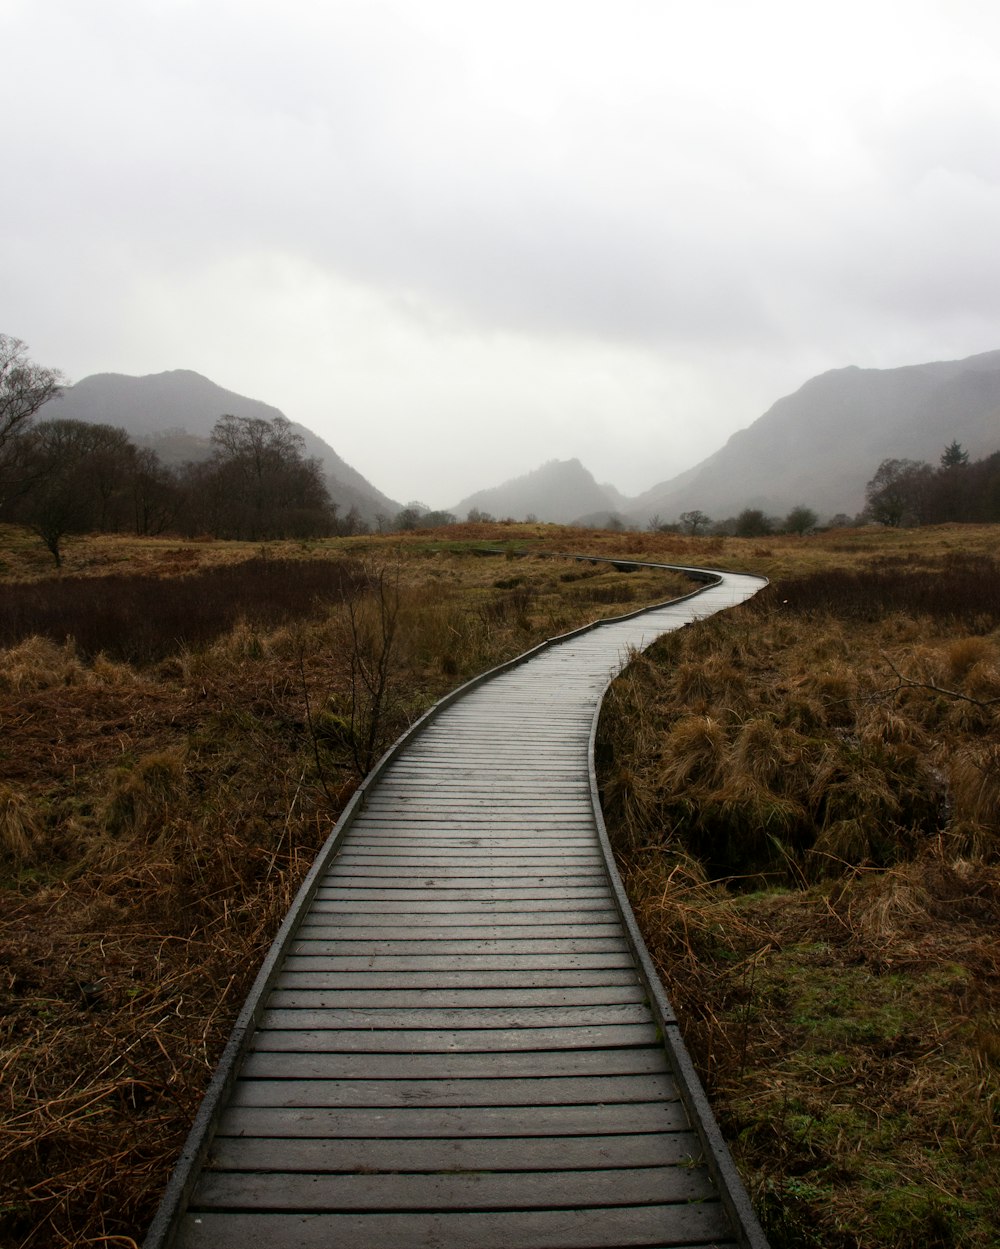 a wooden walkway in a field with mountains in the background